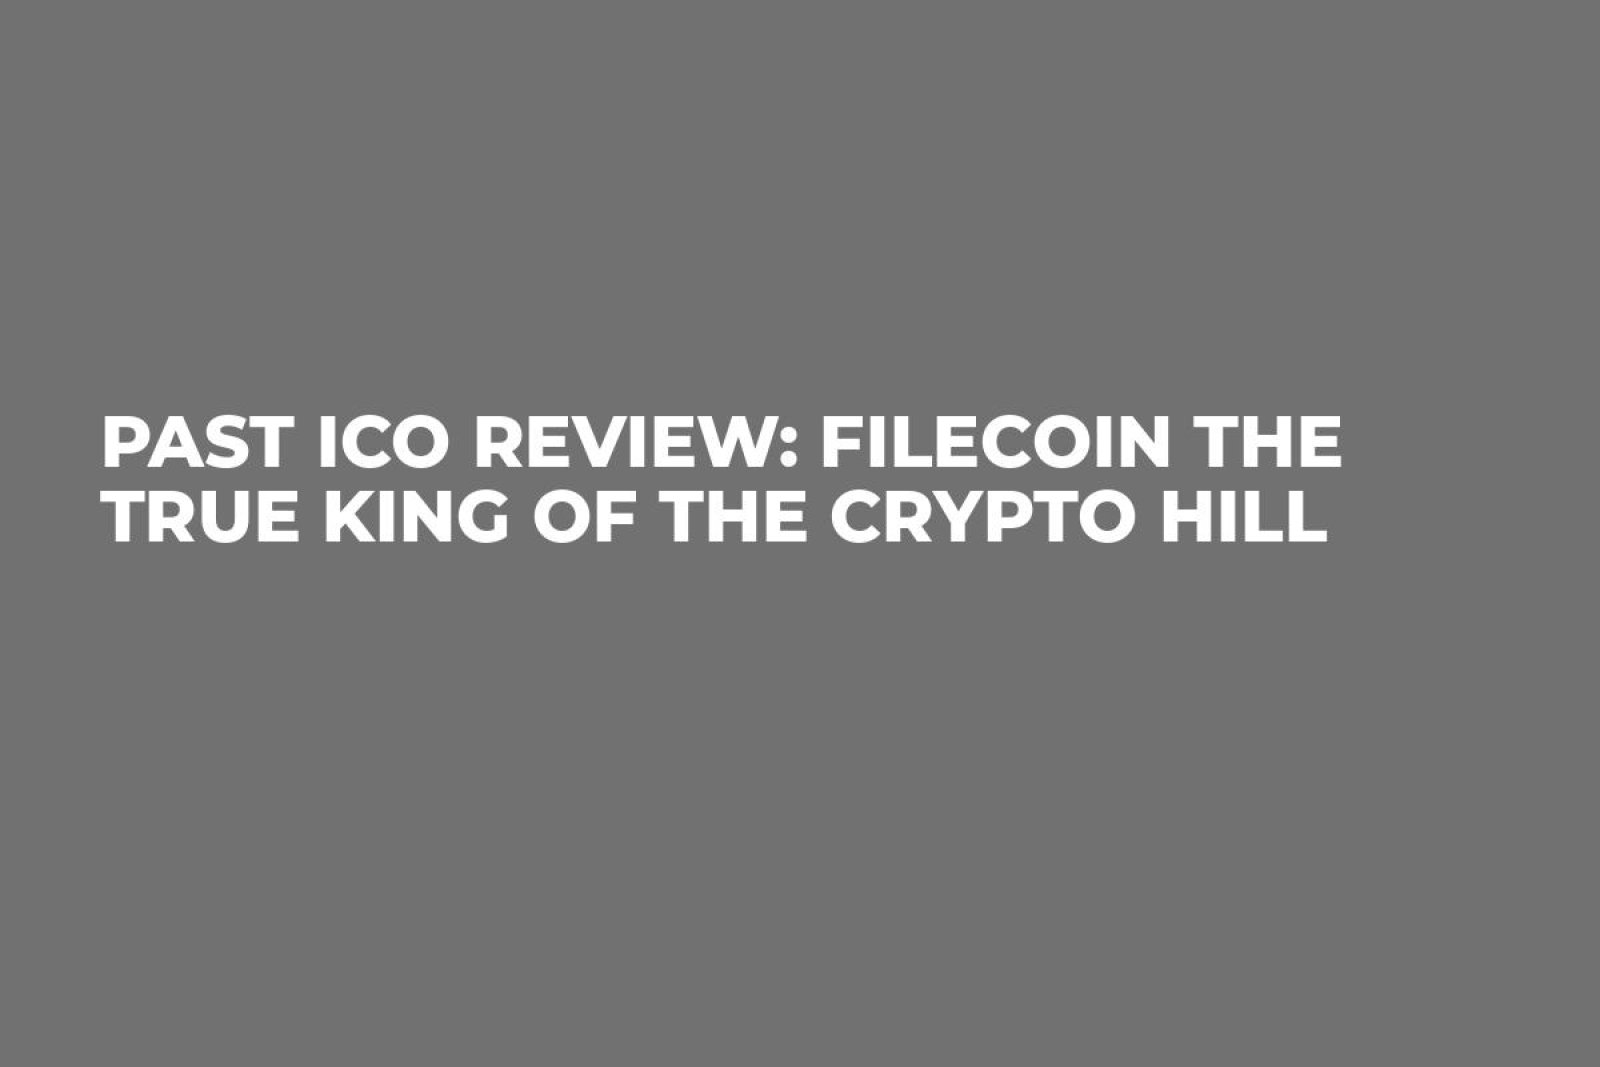 FileDrive Labs (FILECOIN) ICO Rating, Reviews and Details | ICOholder